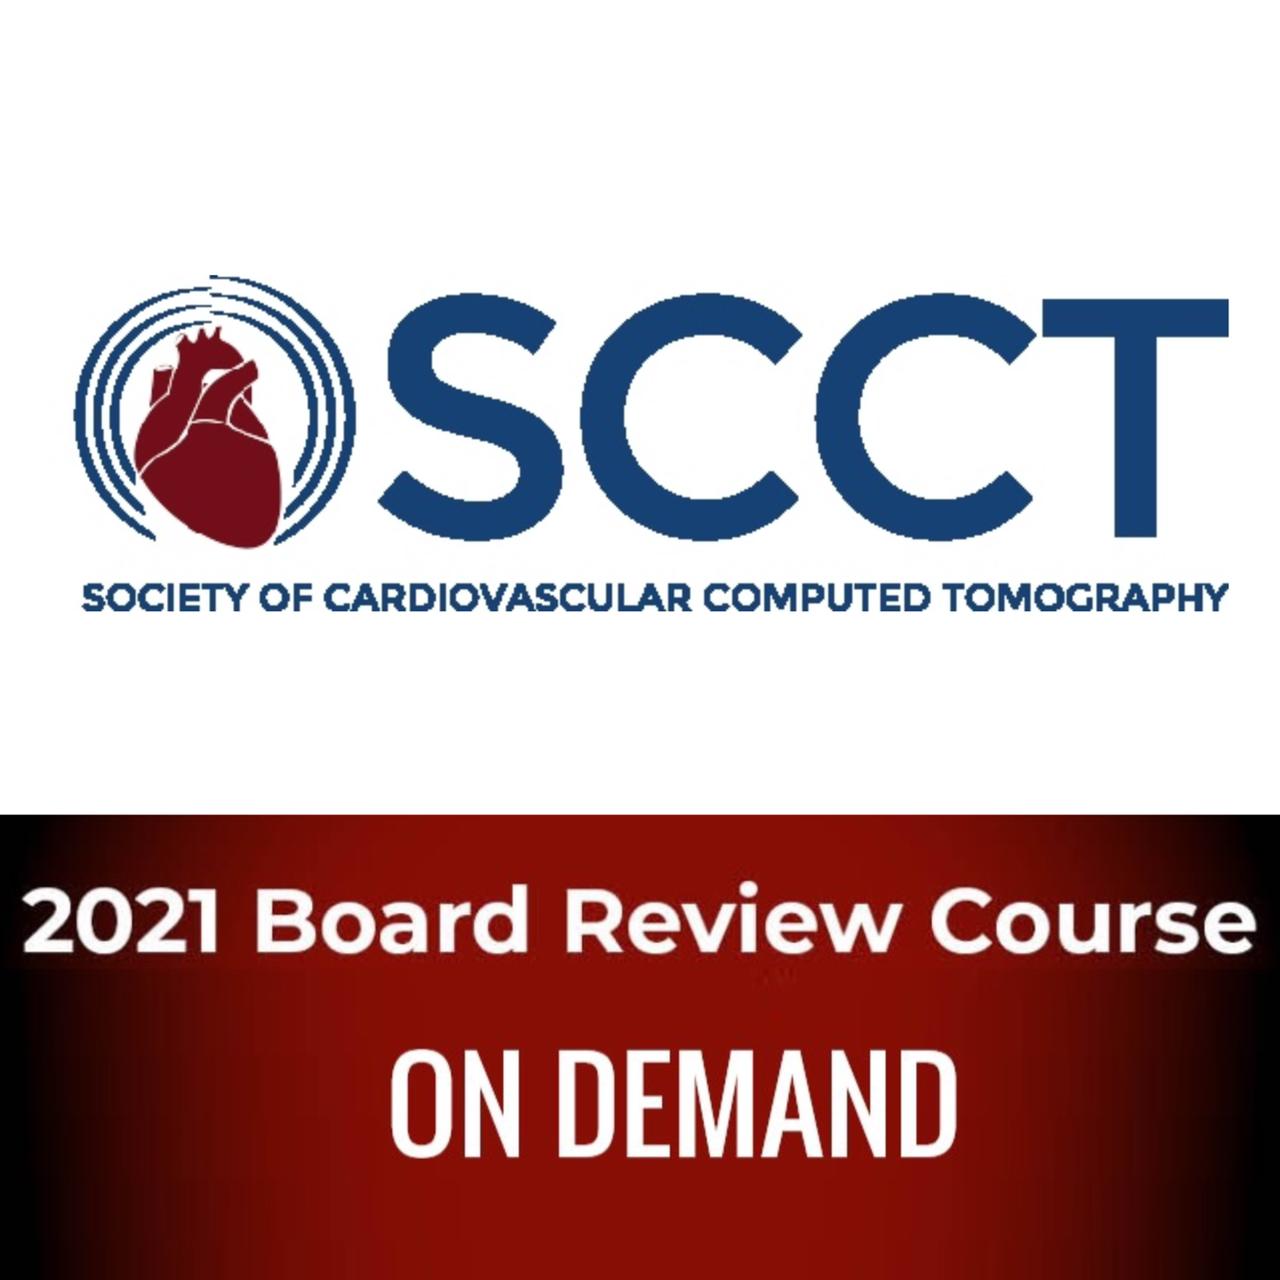 SCCT Board Review and Update of Cardiovascular CT 2021